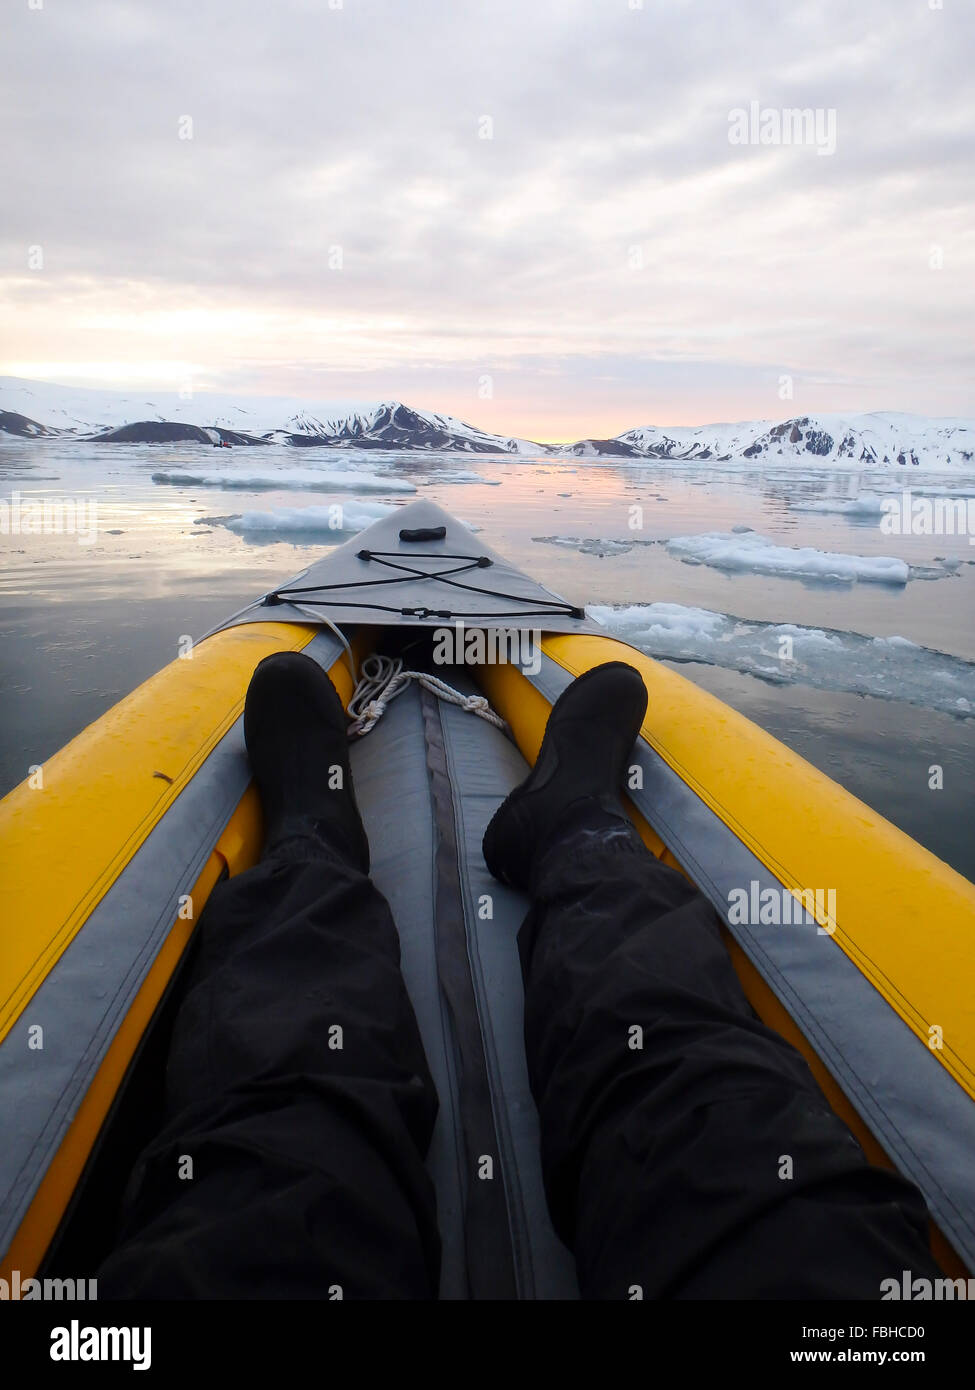 View inside kayak of sun setting over ice field in Antarctica. Stock Photo